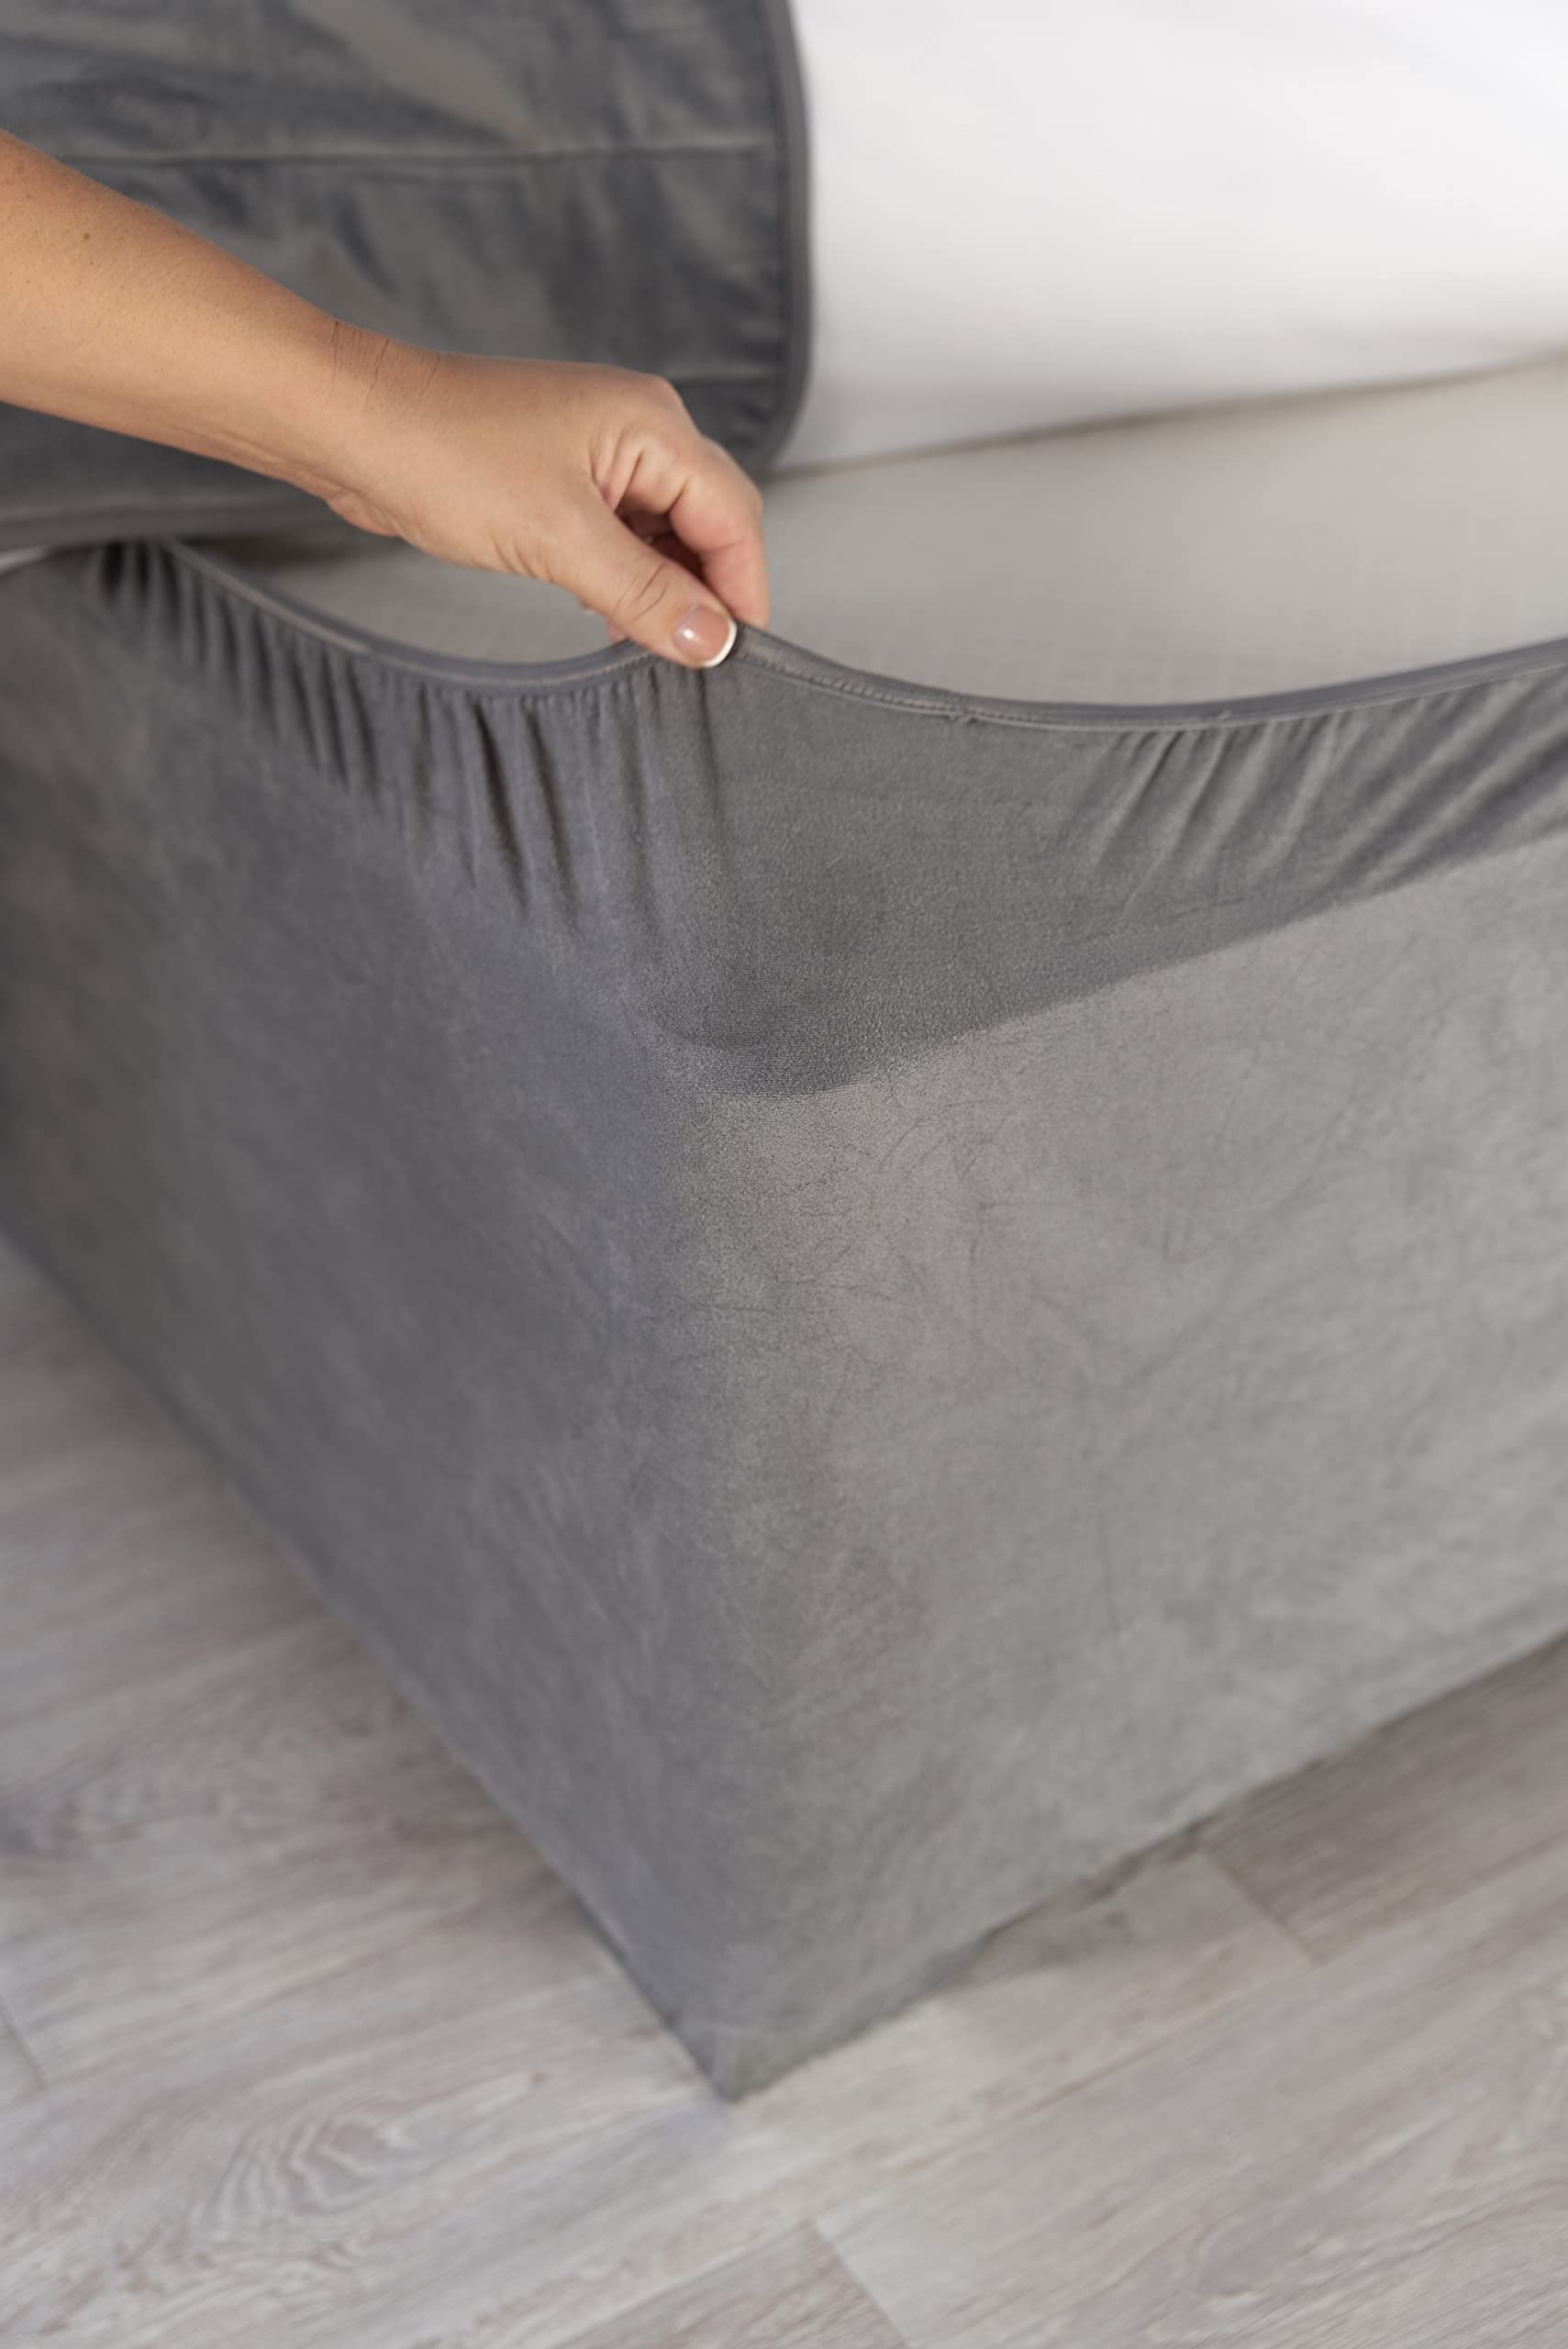 Belledorm 19" Extra Deep Base Wrap Valance Sheet - Transforms a drab looking bed base divan - Luxury Faux Suede (Charcoal, Double)